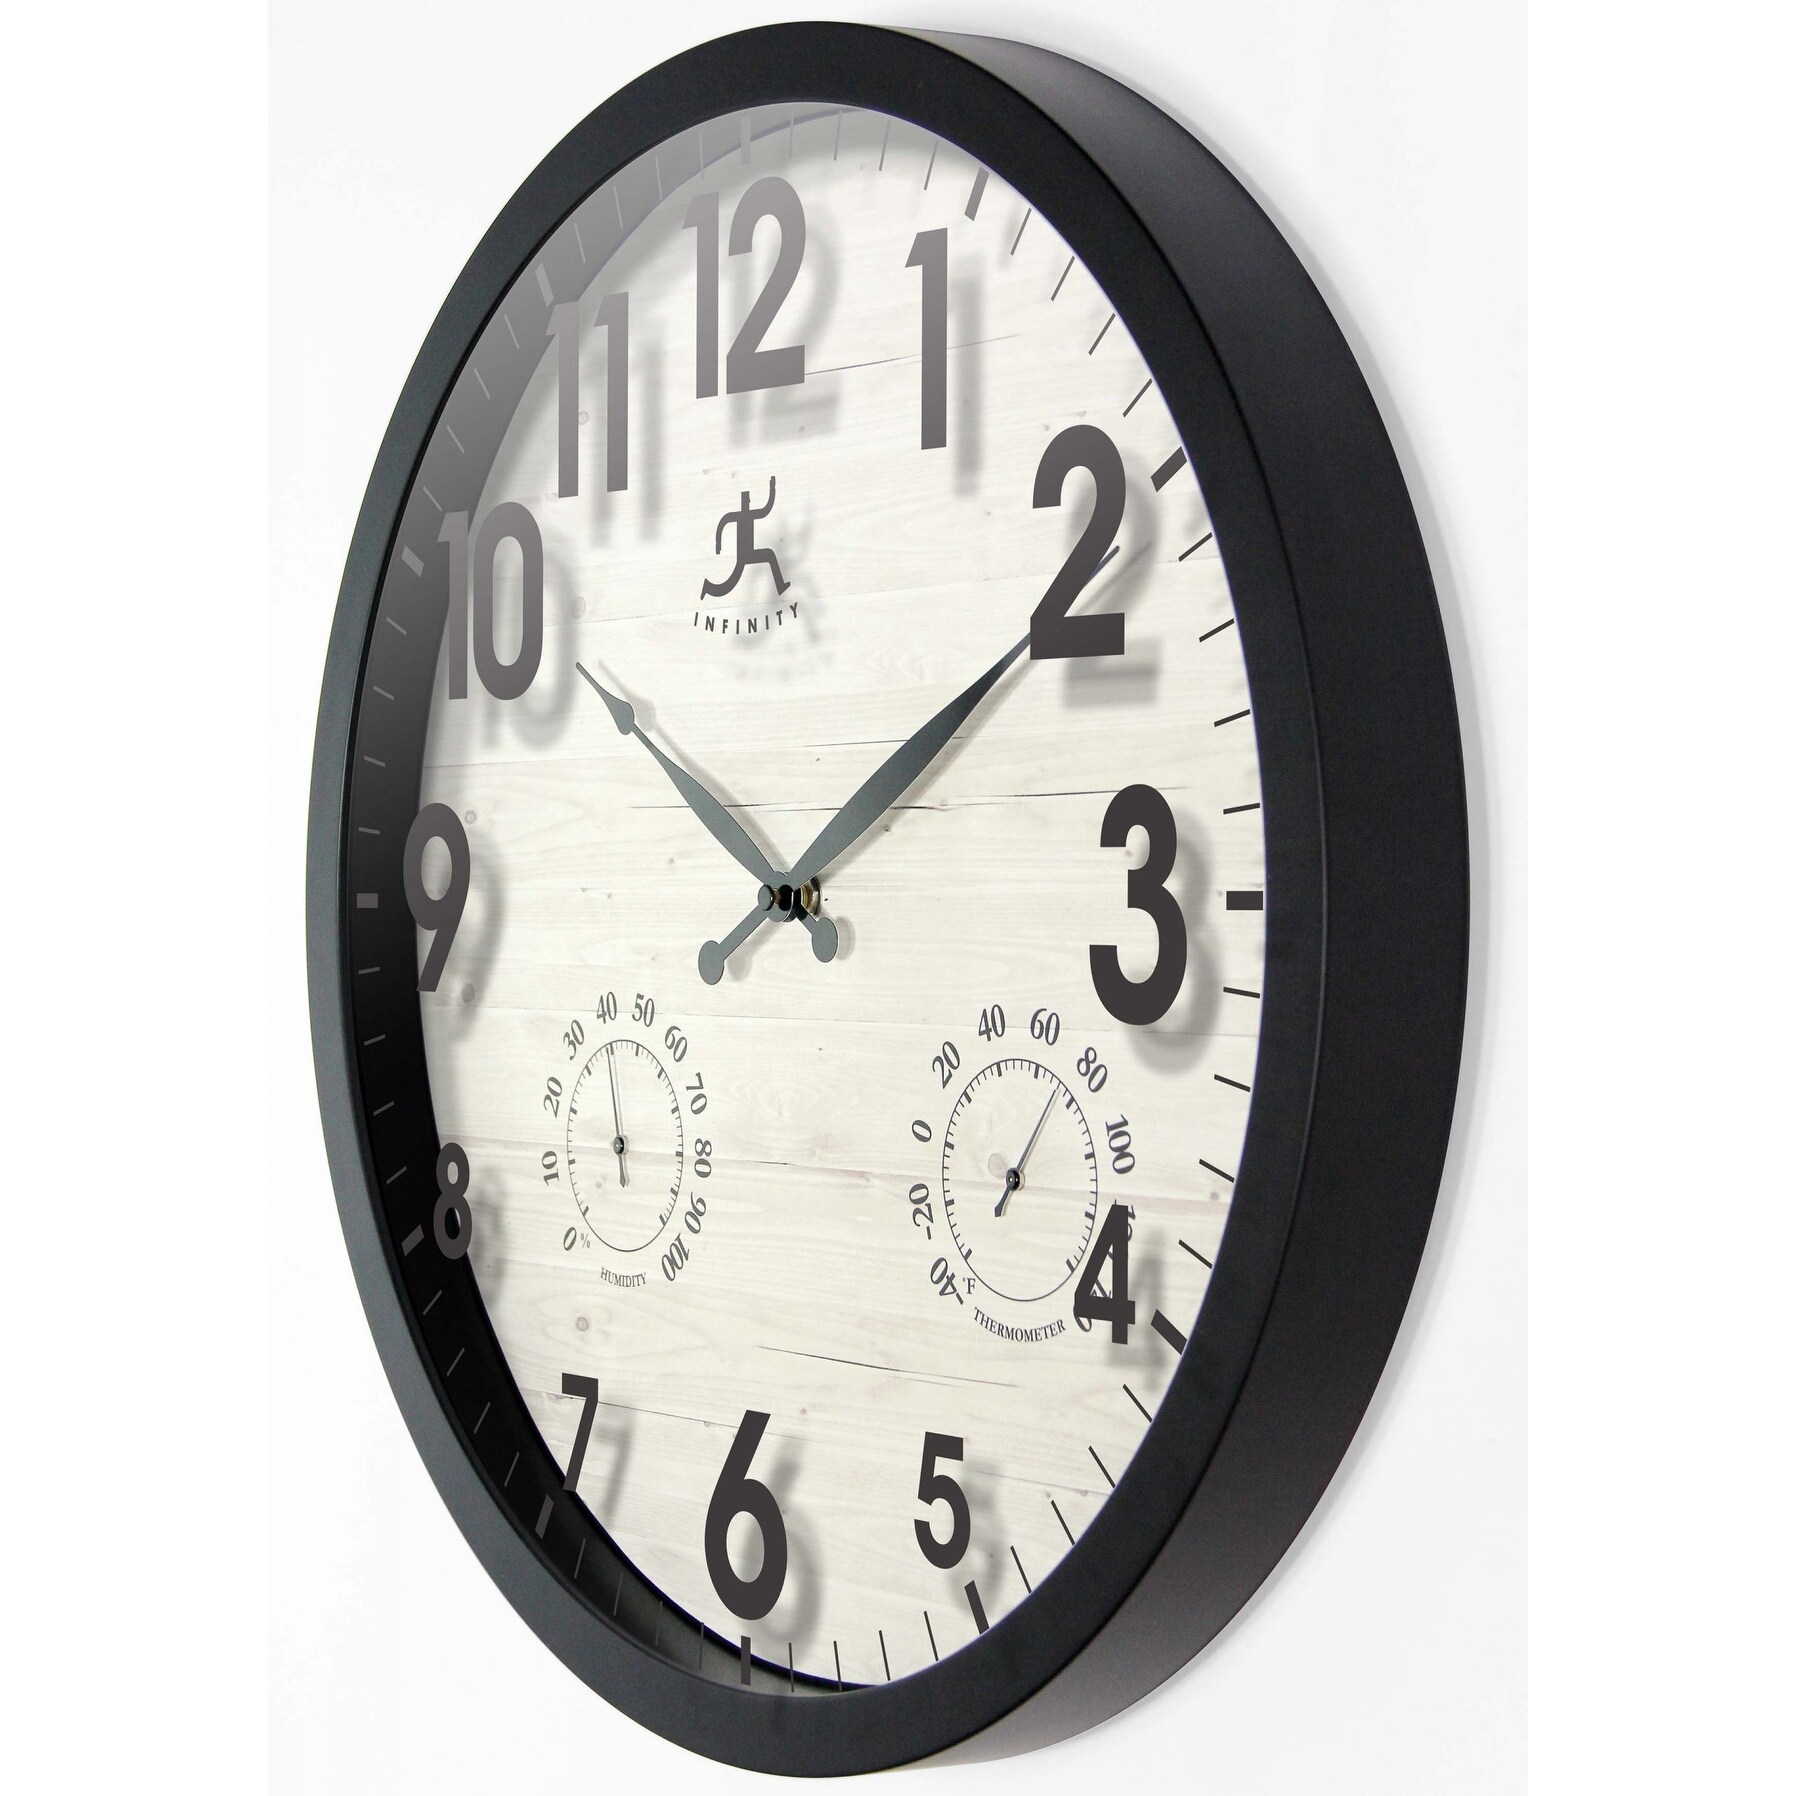 https://ak1.ostkcdn.com/images/products/is/images/direct/73c6954a523fe105fc0f3cd0ca291aeb3d4f21ae/Concordia-18-inch-Black-Indoor-Outdoor-Decorative-Wall-Clock-With-Temperature-and-Humidity.jpg